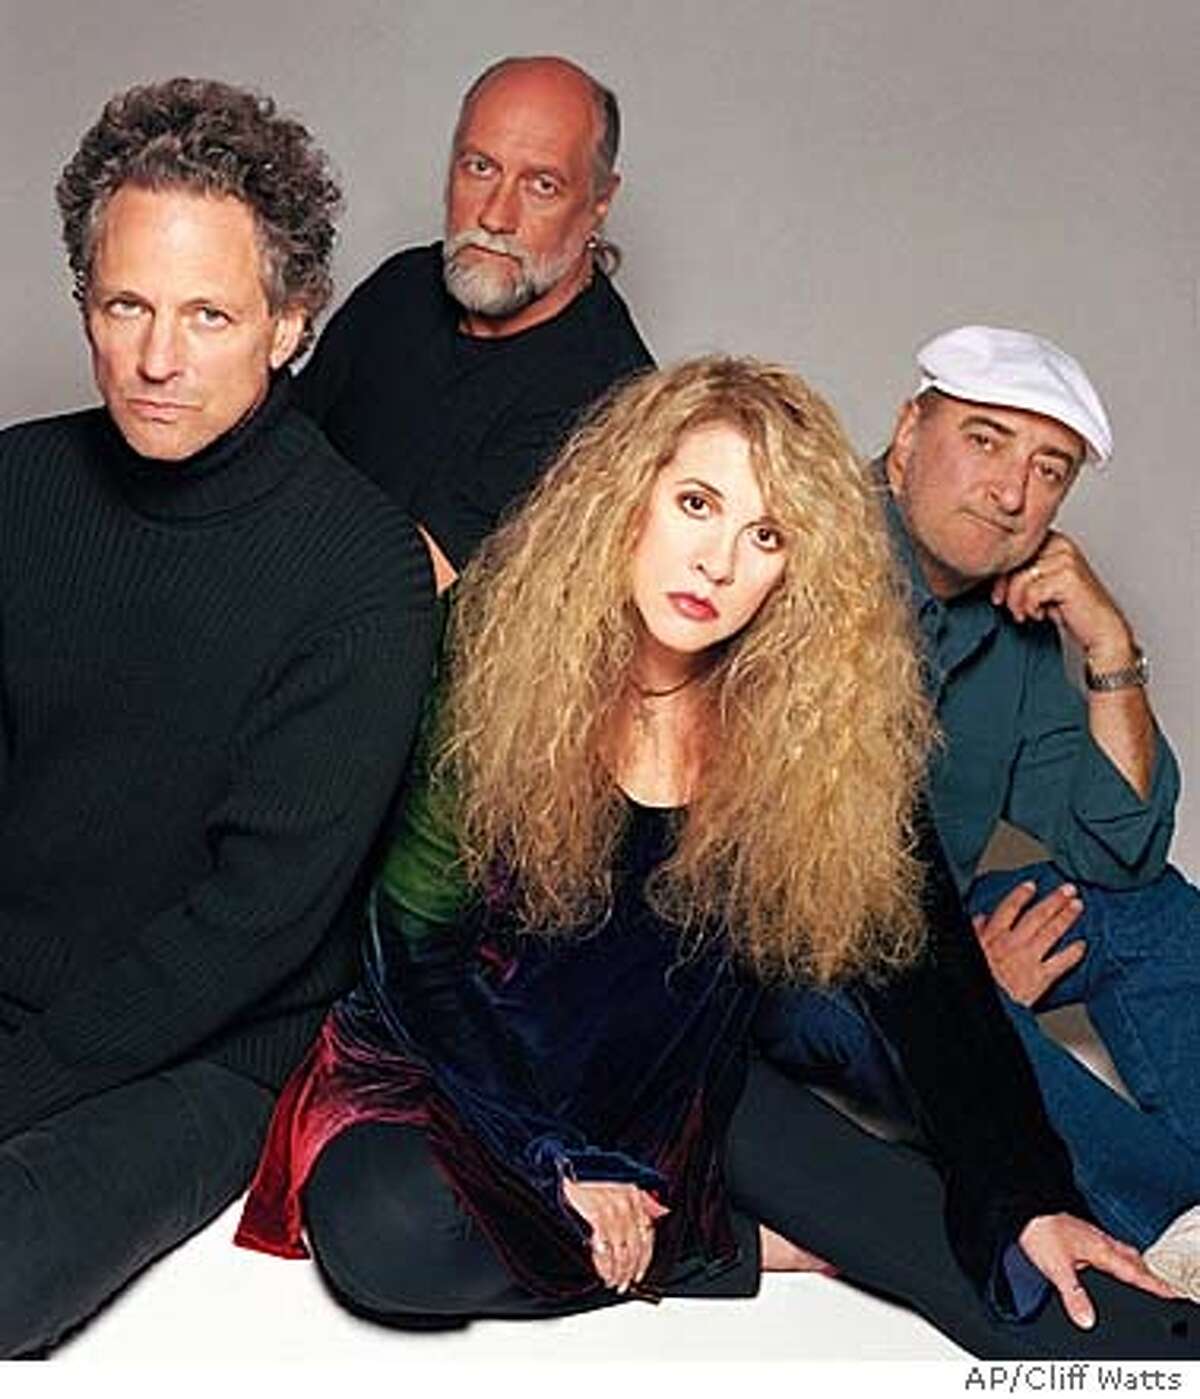 ** ADVANCE FOR WEEKEND EDITIONS MAY 1-4 **The rock group Fleetwood Mac poses together in this undated promotional photo for its new album "Say You Will," its first with new material since 1987. Current members of the band, from left, are, Lindsey Buckingham, Mick Fleetwood, Stevie Nicks and John McVie. (AP Photo/Cliff Watts)